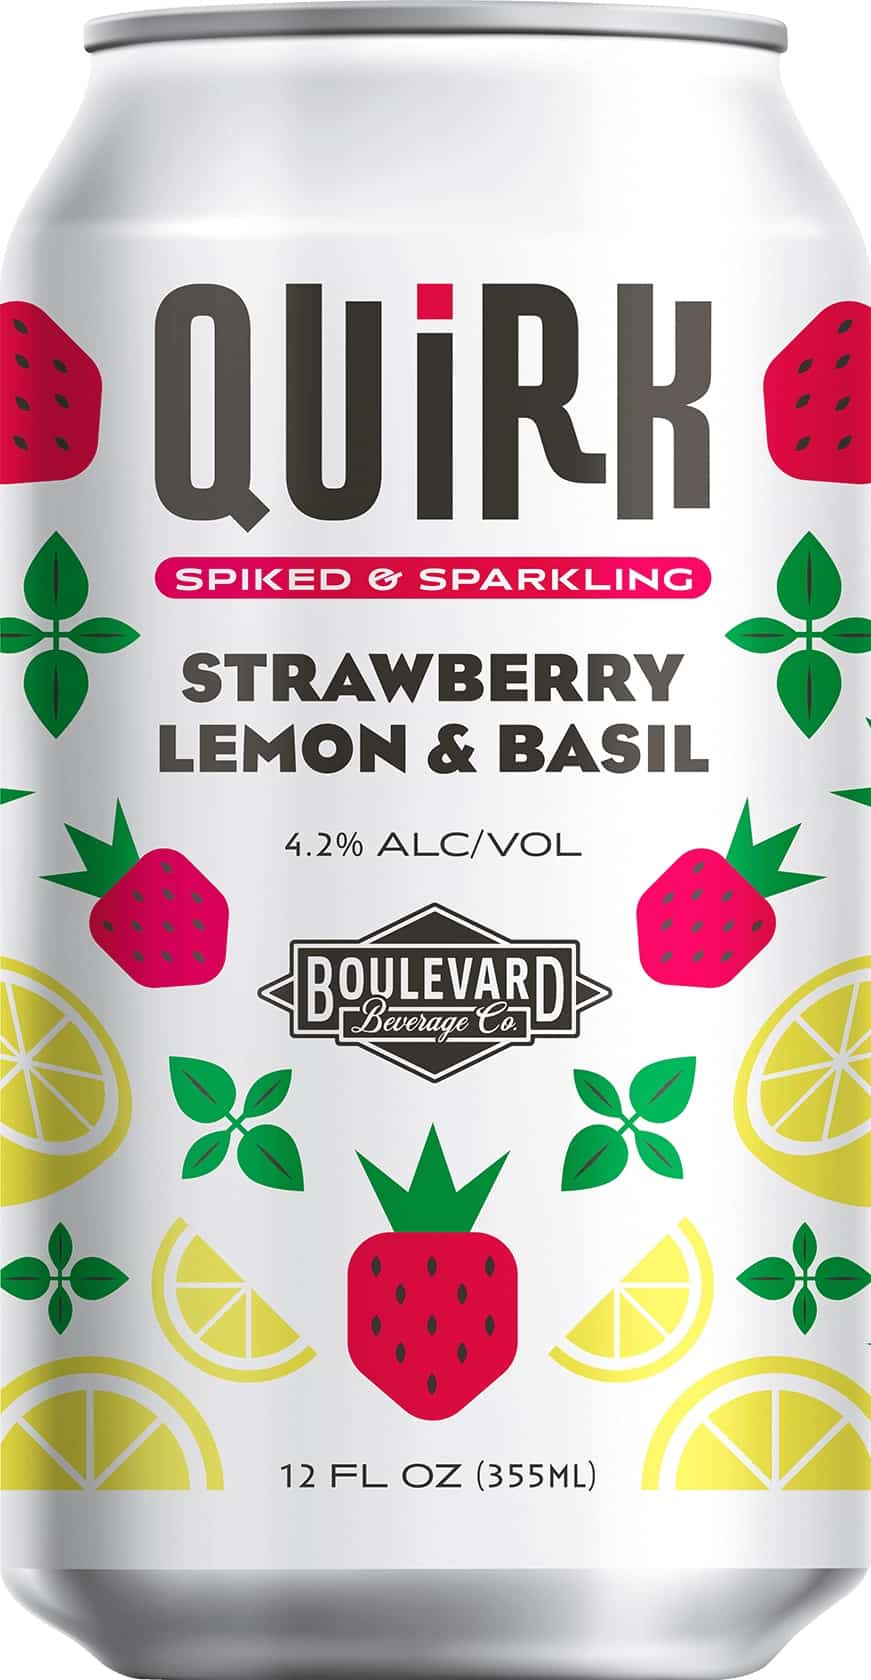 Boulevard Brewing Company, Missouri – Quirk Spiked & Sparkling